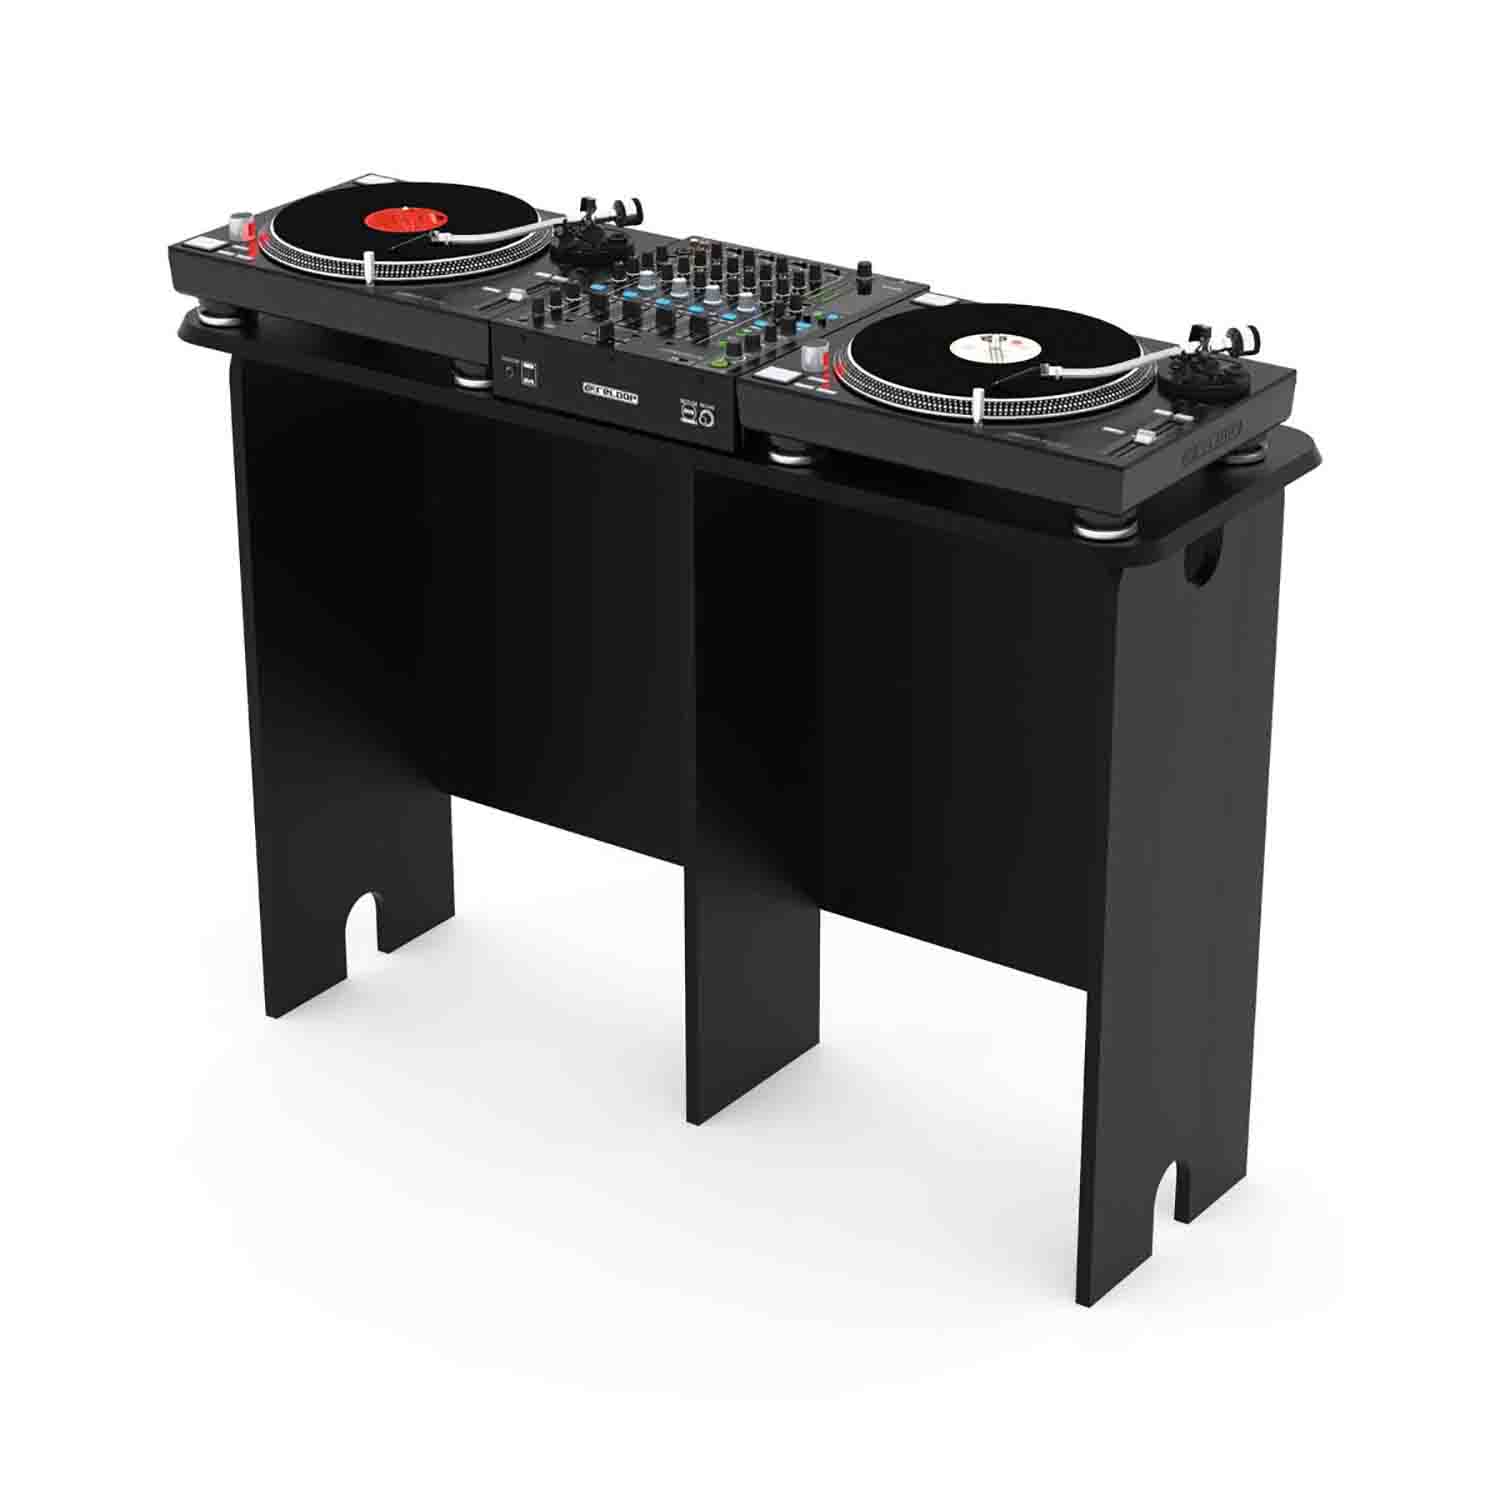 Glorious GigBar DJ Workstation for Turntables and Controllers - Black - Hollywood DJ